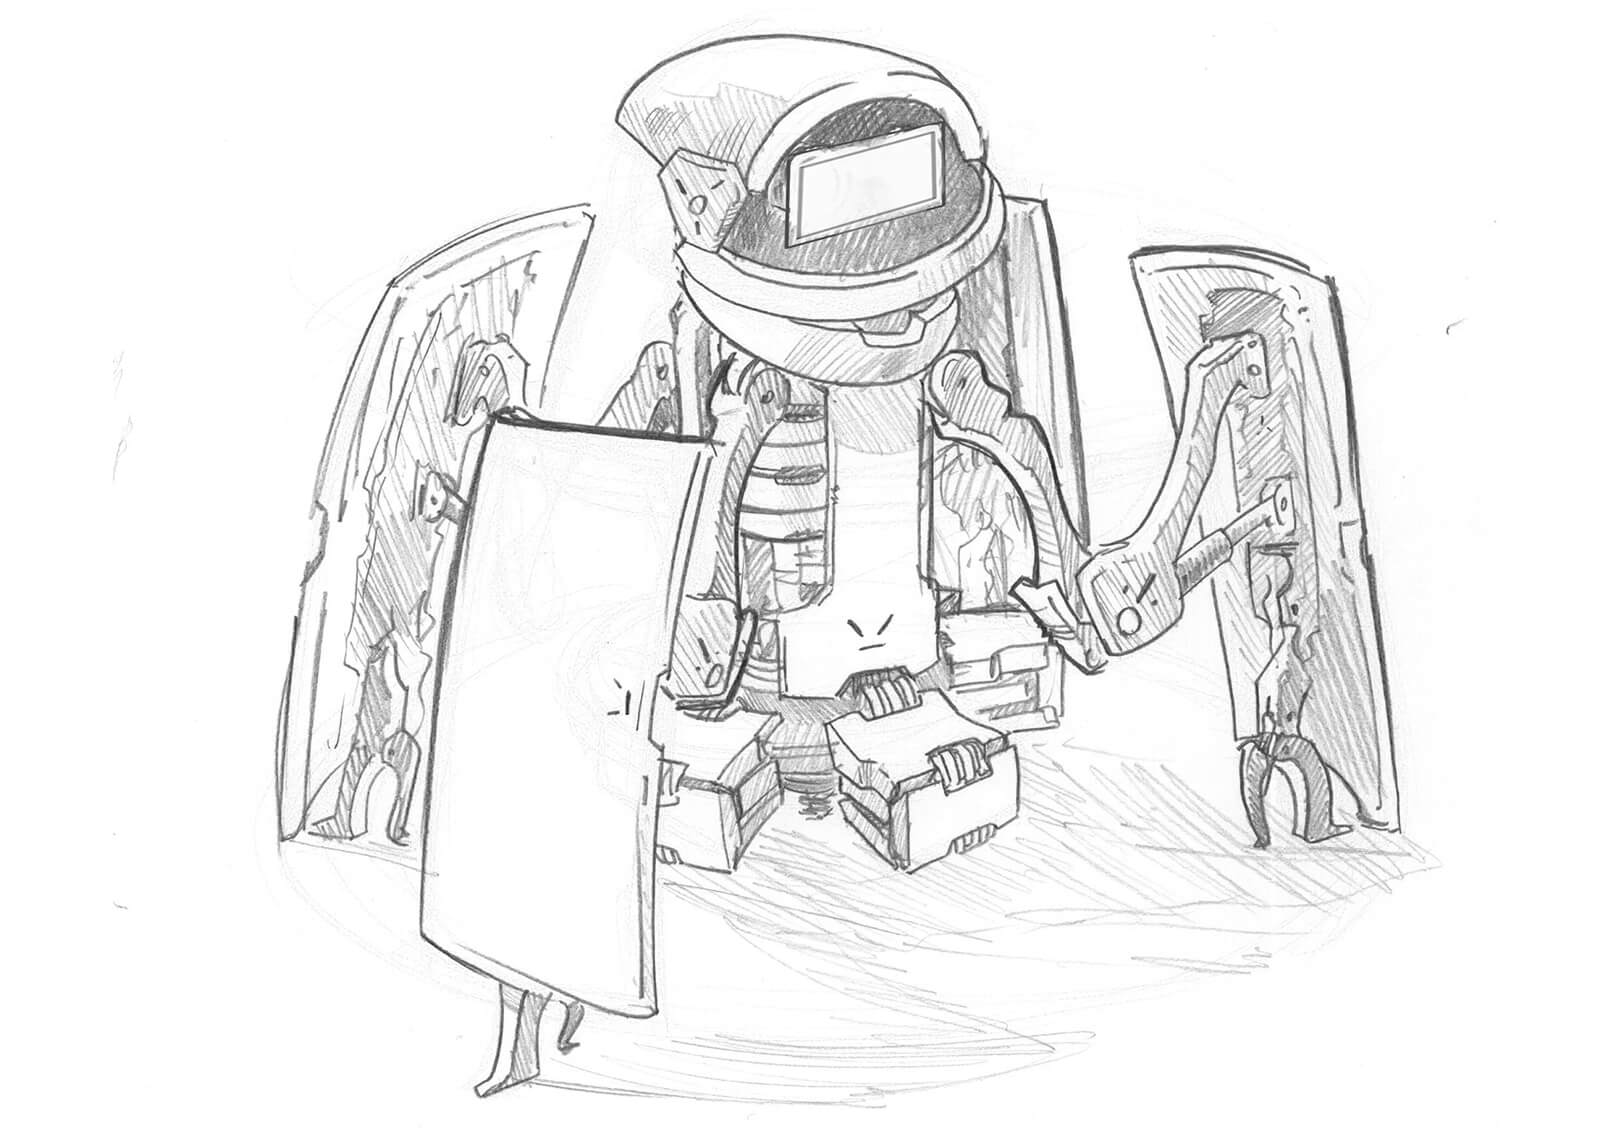 Black-and-white sketch of a short robot-like device with splayed-out panels revealing machinery inside